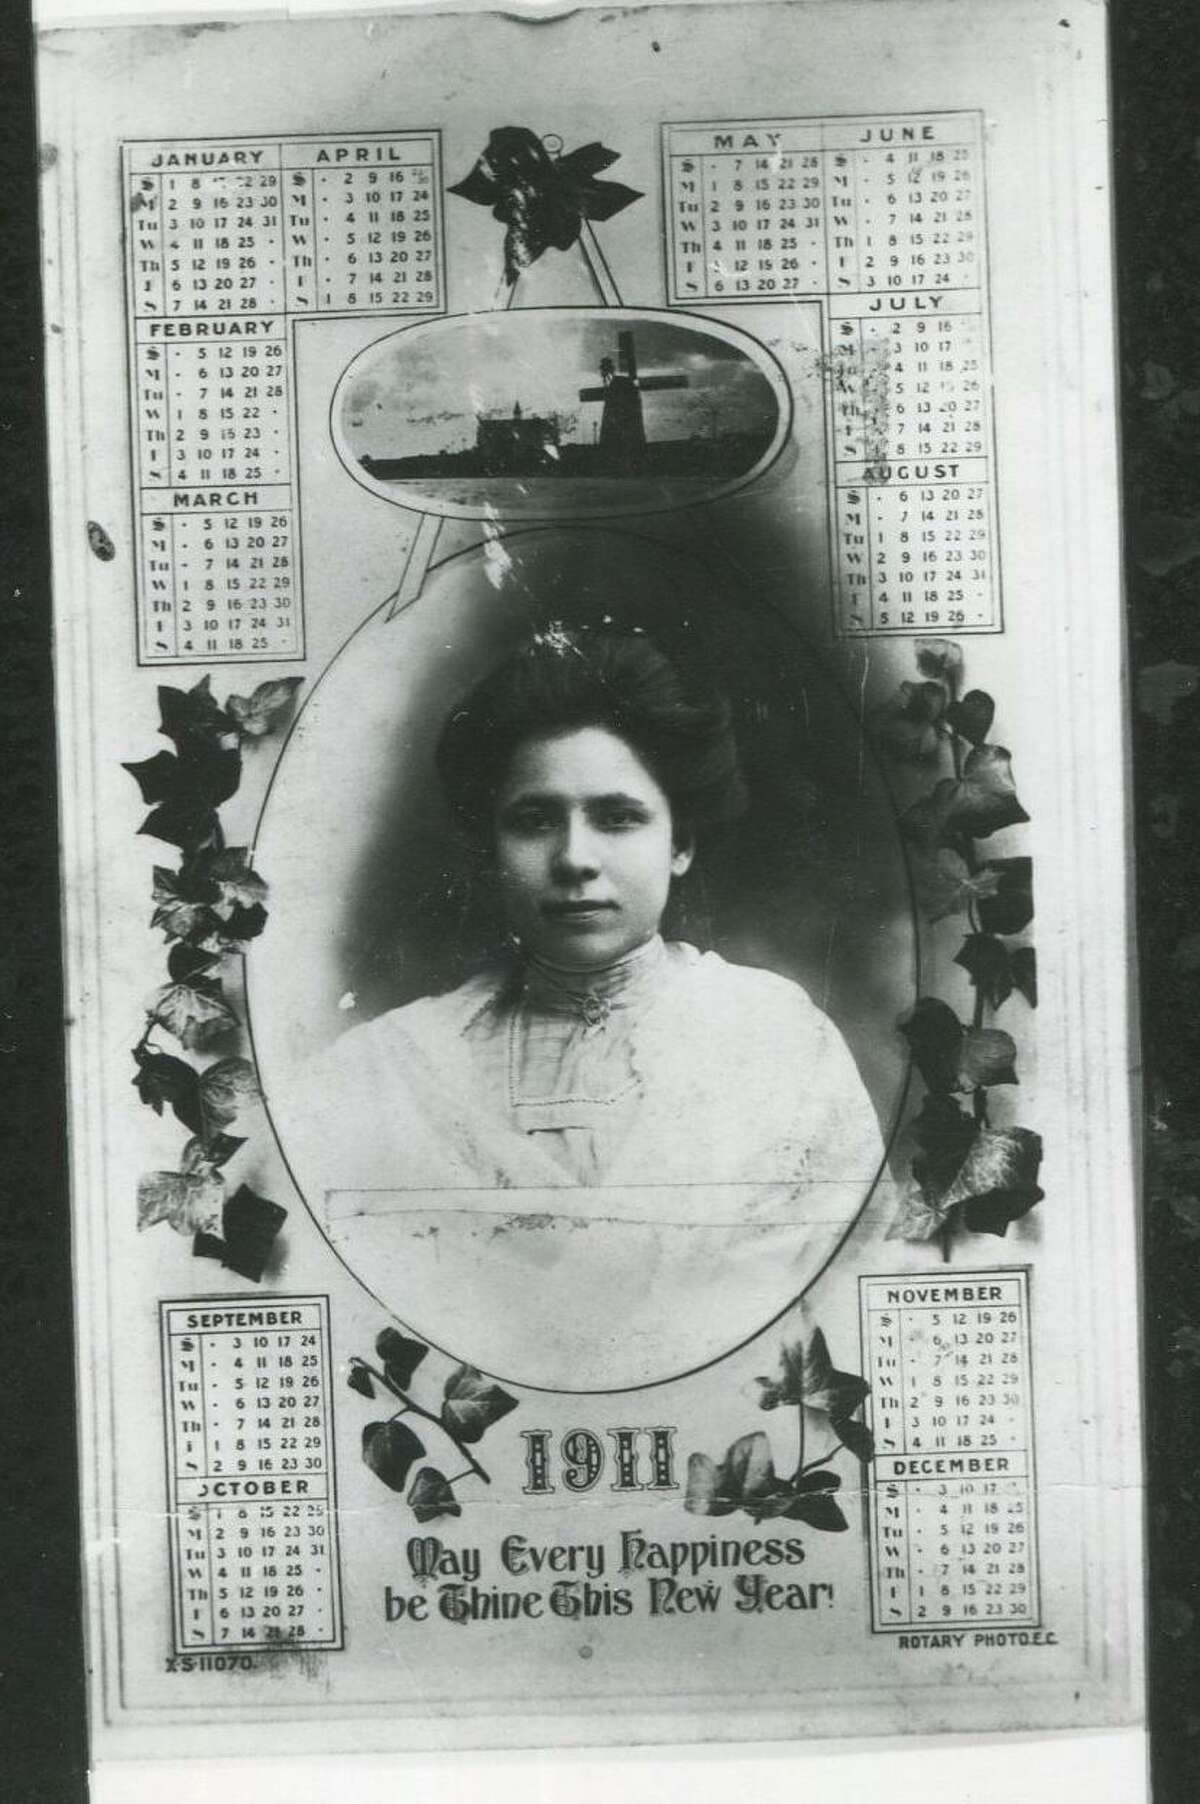 This 1911 calendar, distributed as a New Year’s card, features a portrait of journalist and civil rights activist Jovita Idar.